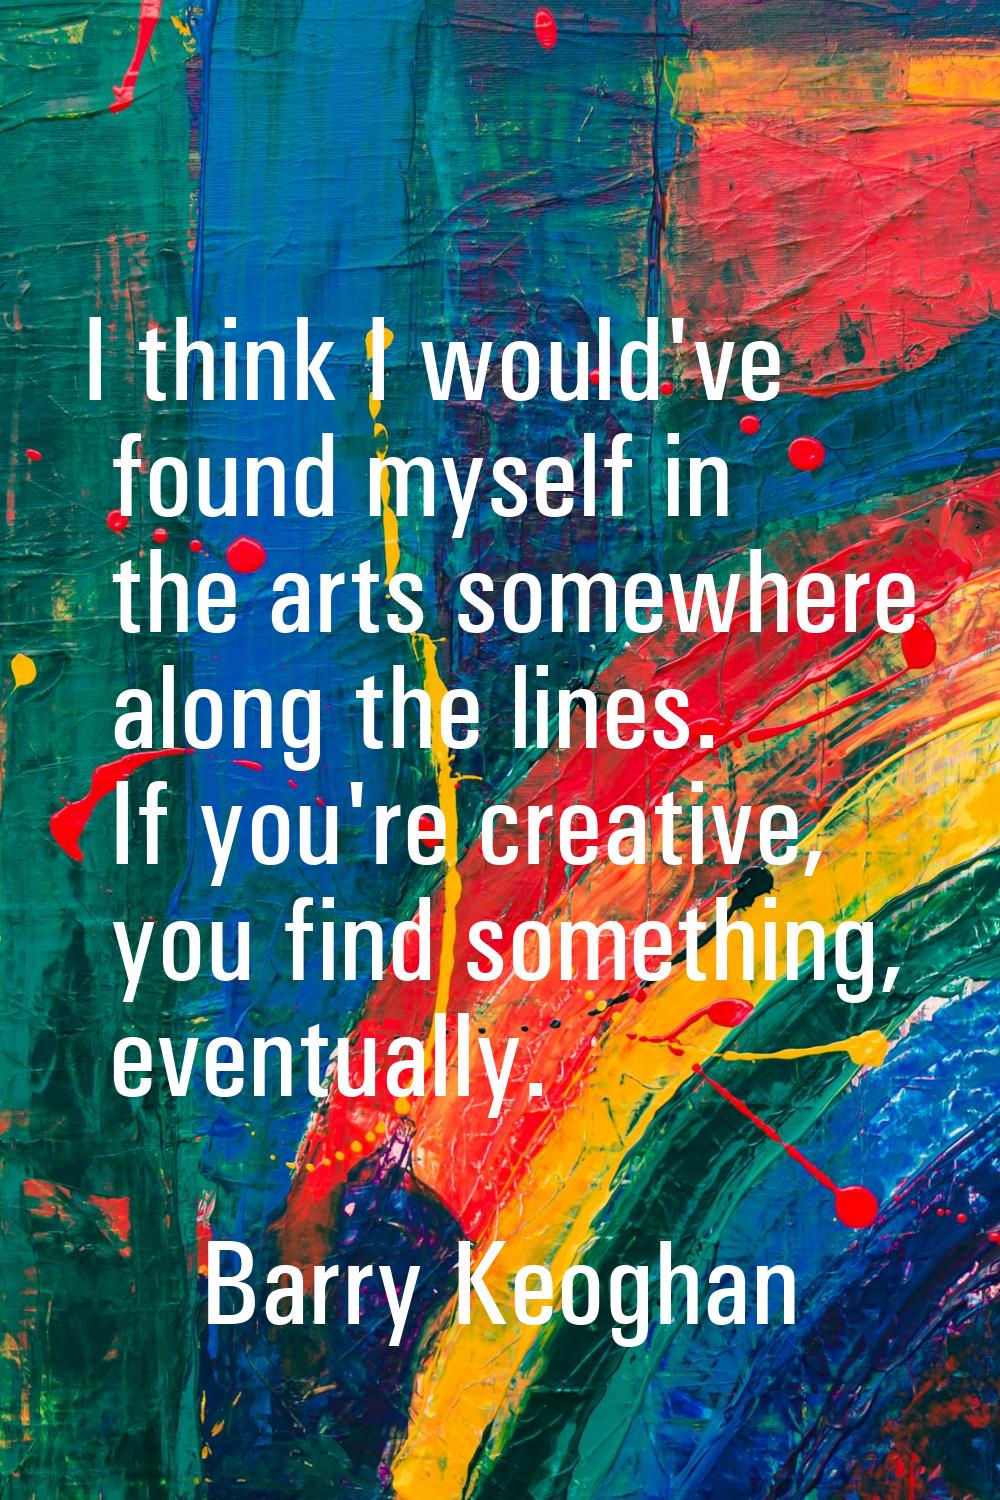 I think I would've found myself in the arts somewhere along the lines. If you're creative, you find